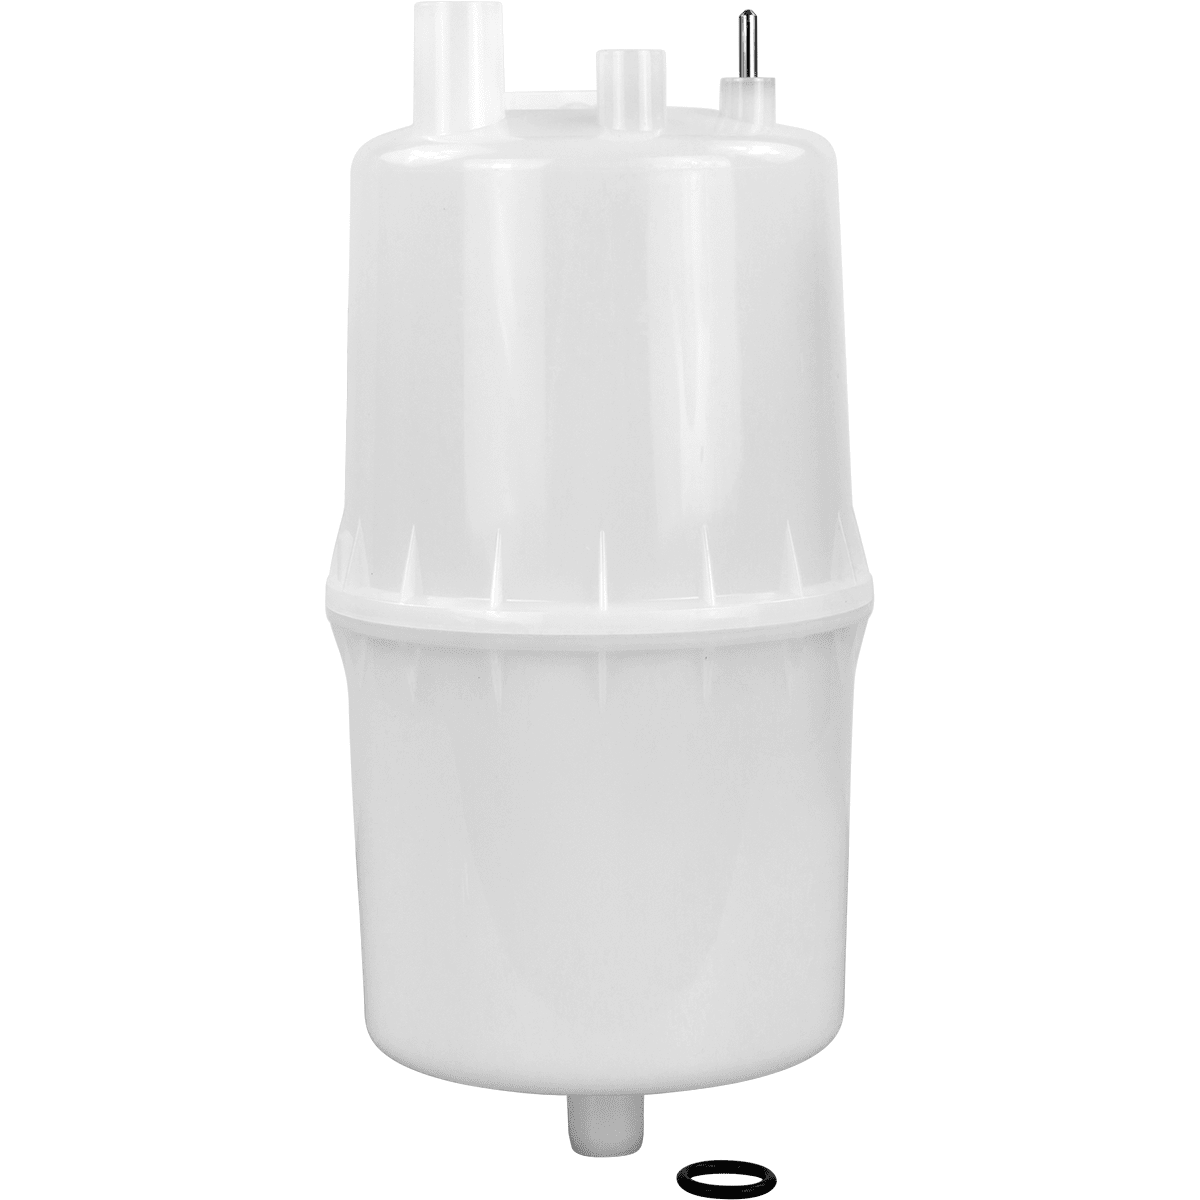 Aprilaire 202a Steam Humidifier Cylinder (fits Nortec® 202)